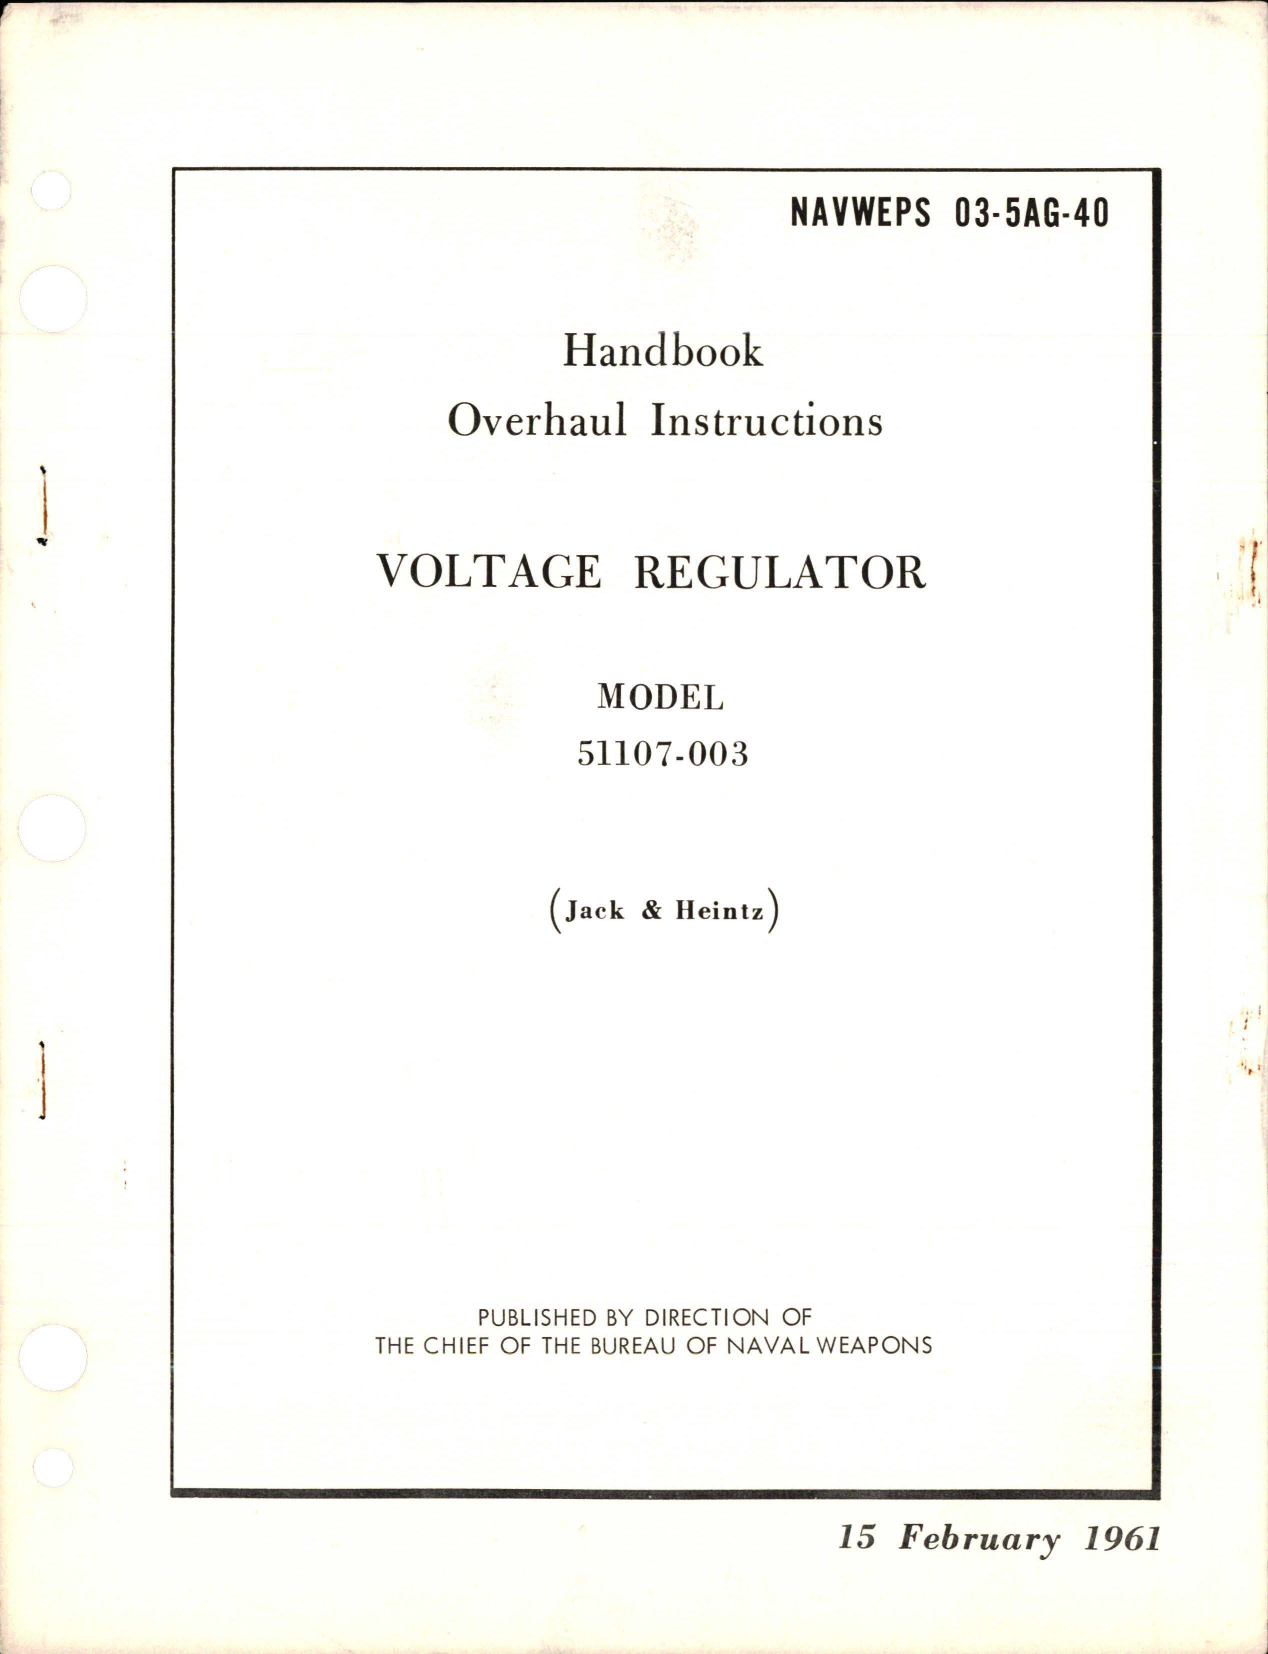 Sample page 1 from AirCorps Library document: Overhaul Instructions for Voltage Regulator - Model 51107-003